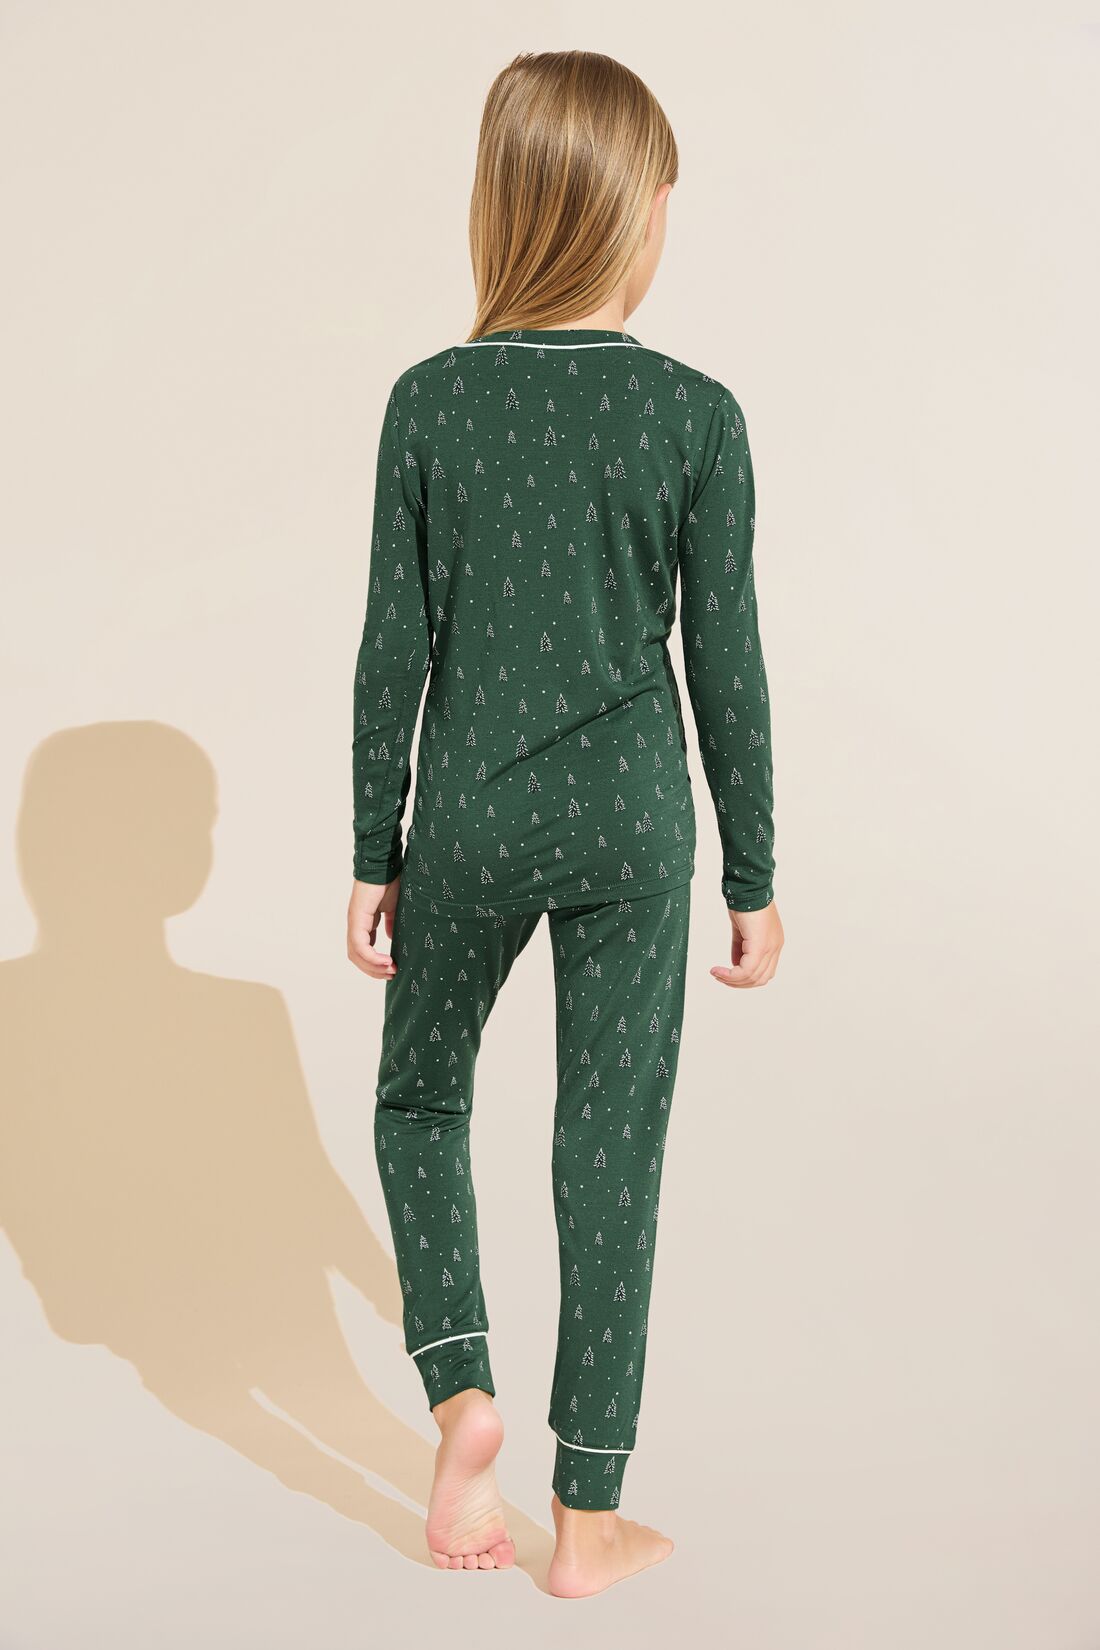 Men's Flannel Pajama Set in Evergreen Forest